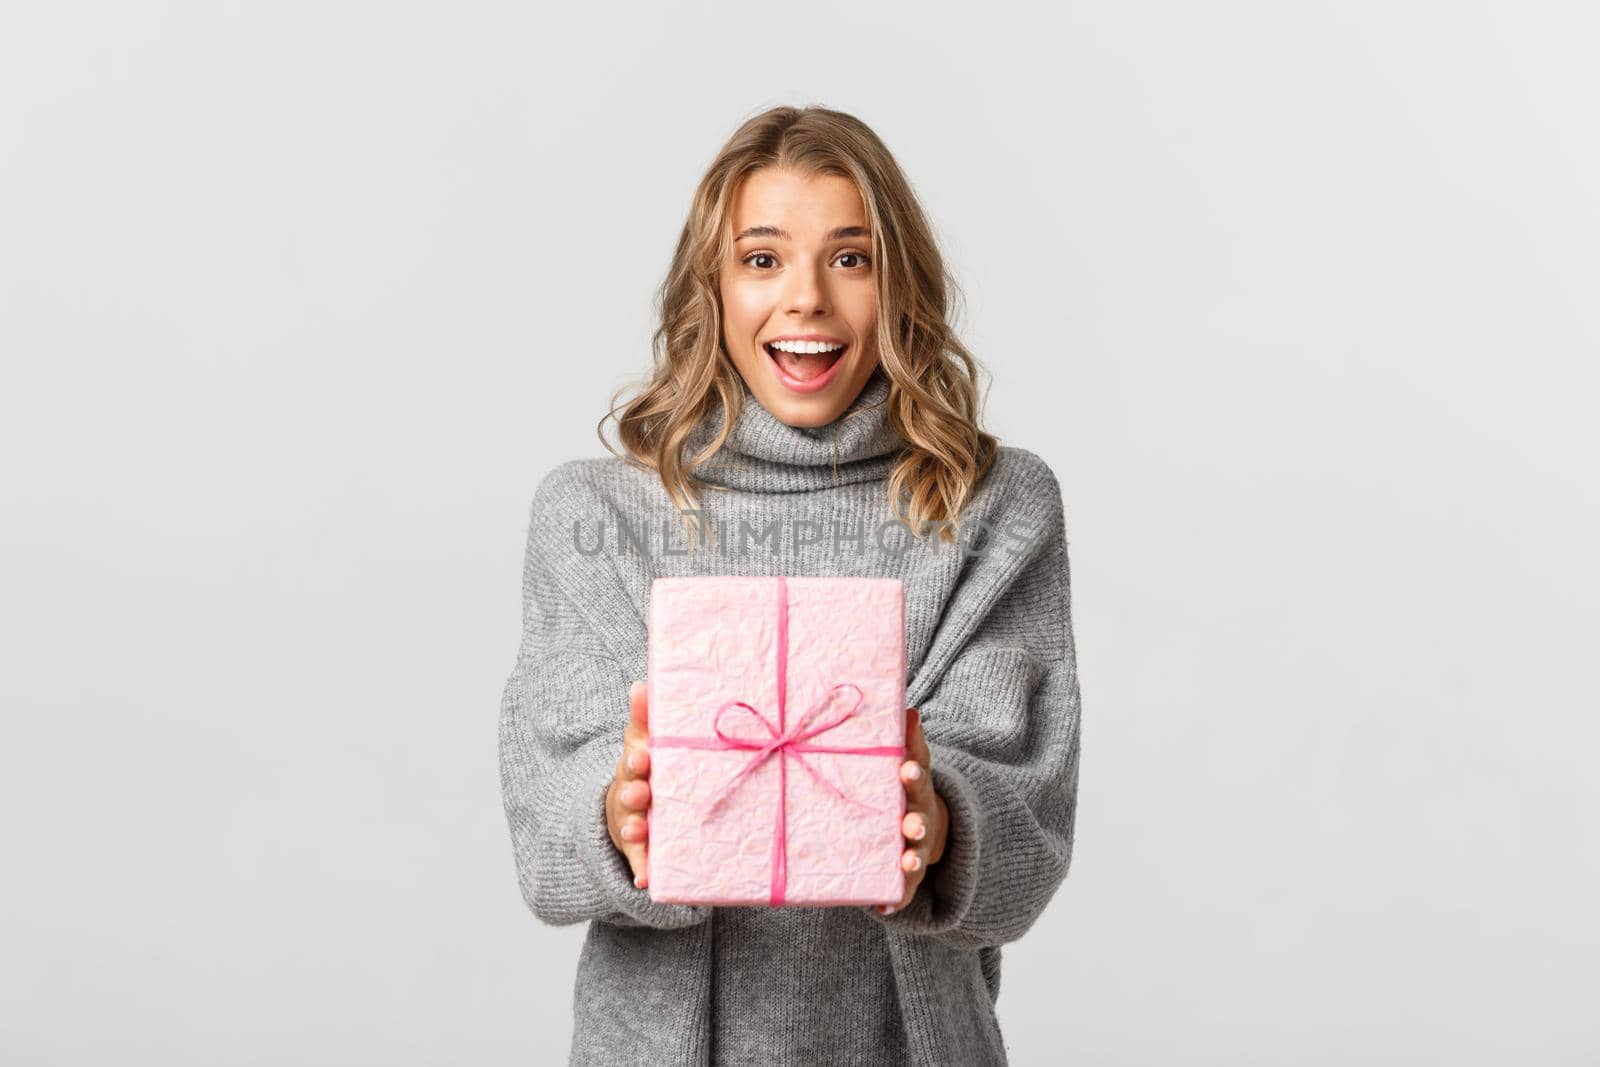 Beautiful young woman in grey sweater, giving gift, congratulating someone with birthday, standing over white background.